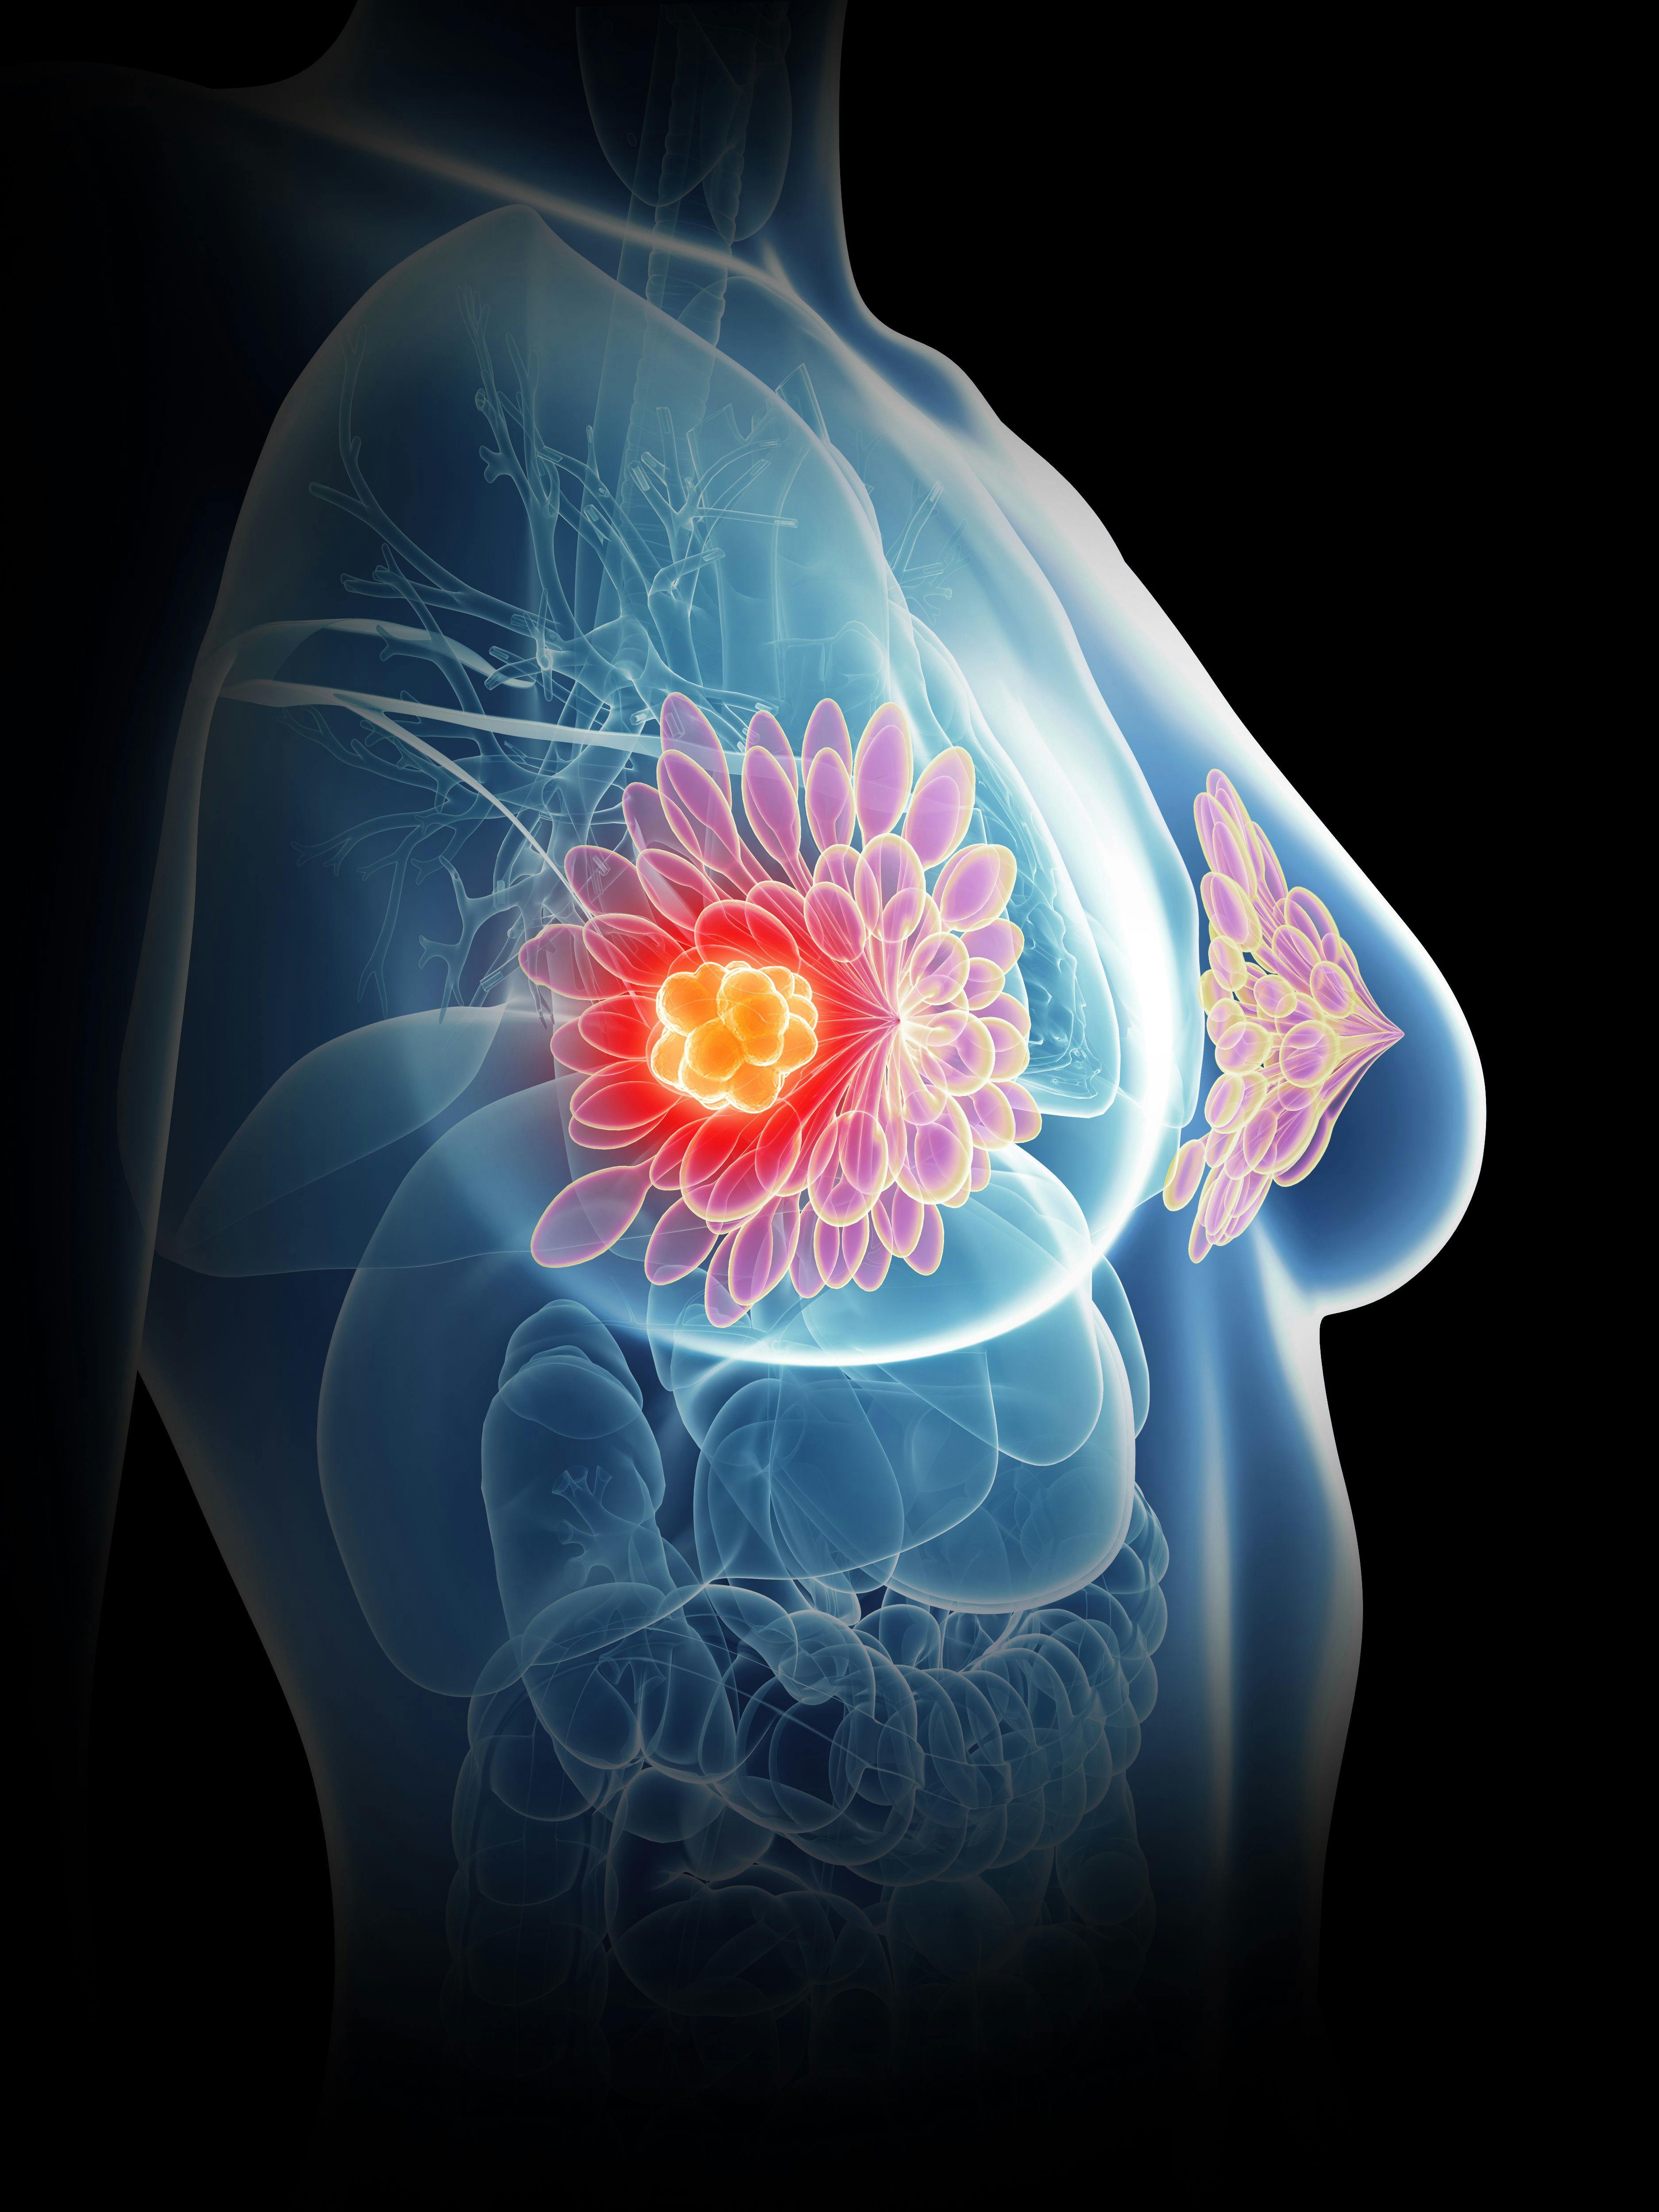 Central nervous system progression-free survival appears to be longer with trastuzumab deruxtecan than with comparator treatment in those with HER2-positive metastatic breast cancer and brain metastases.